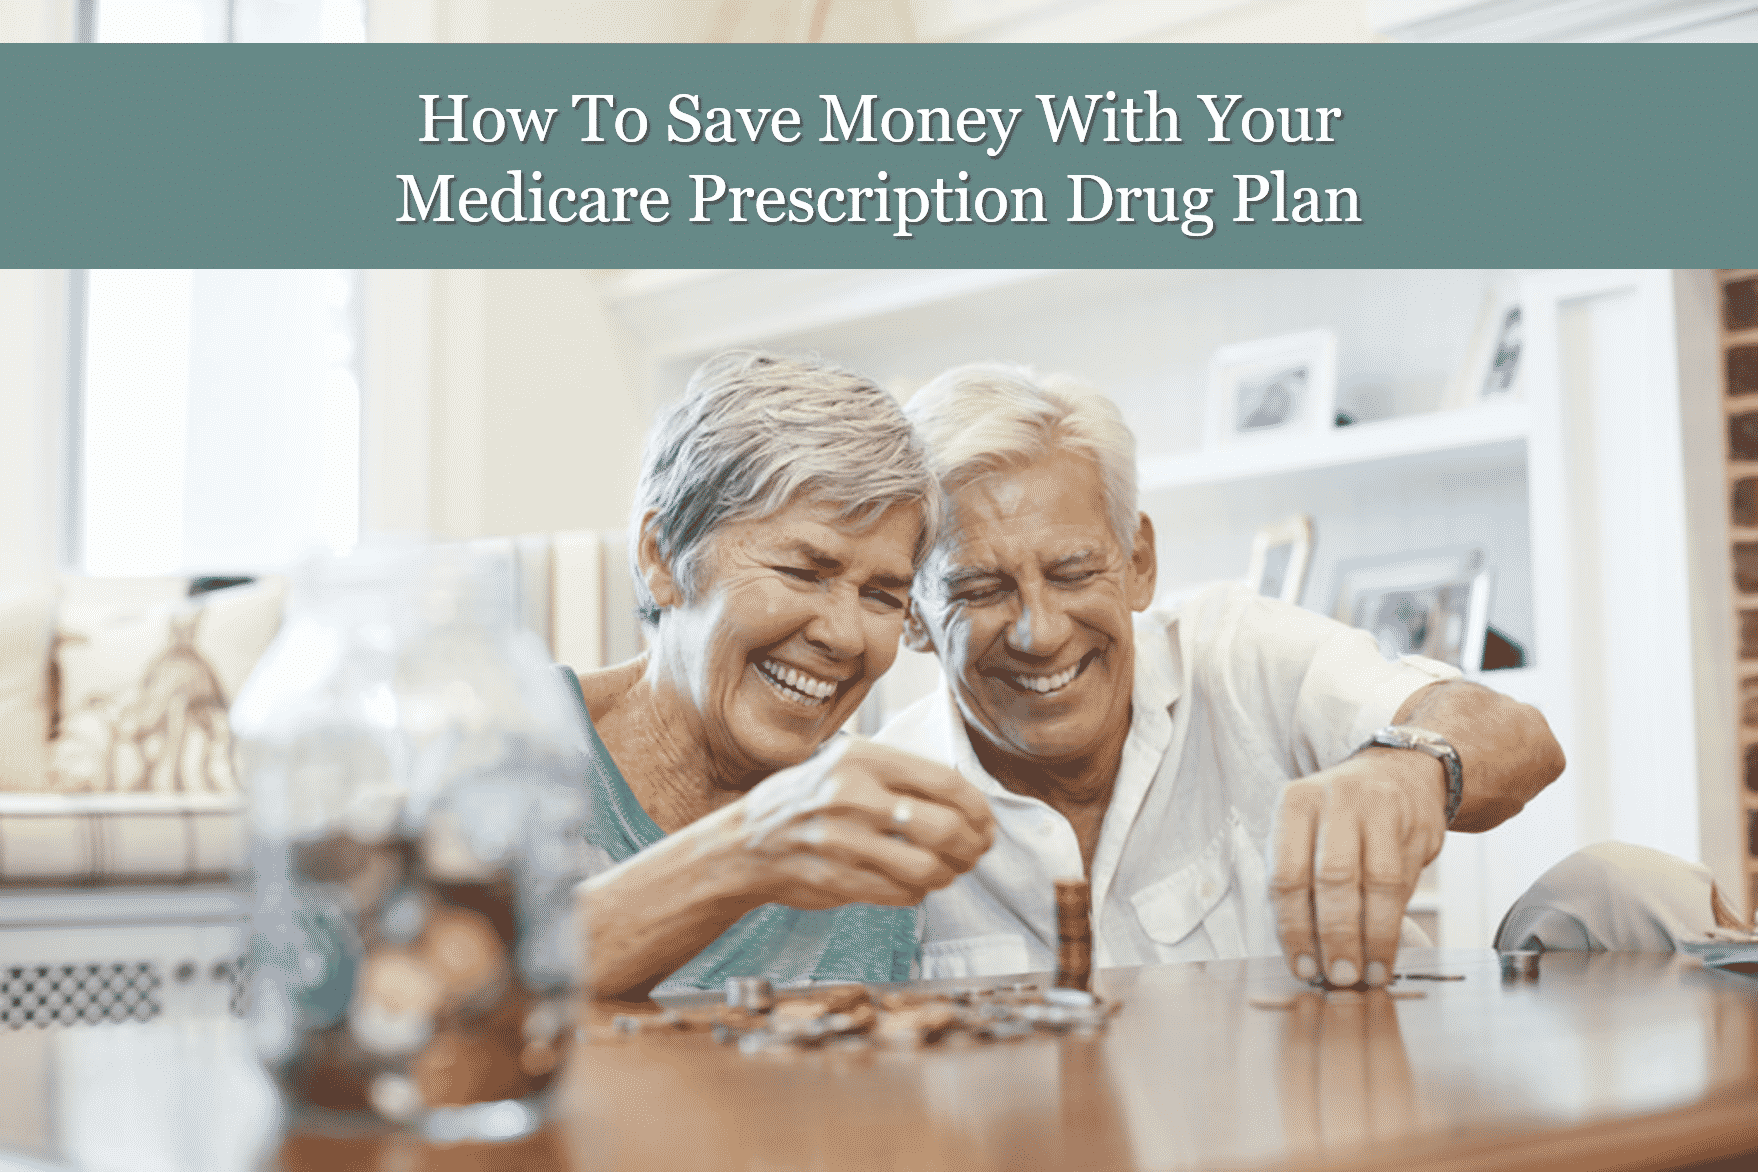 How to Save Money with Your Medicare Prescription Drug Plan